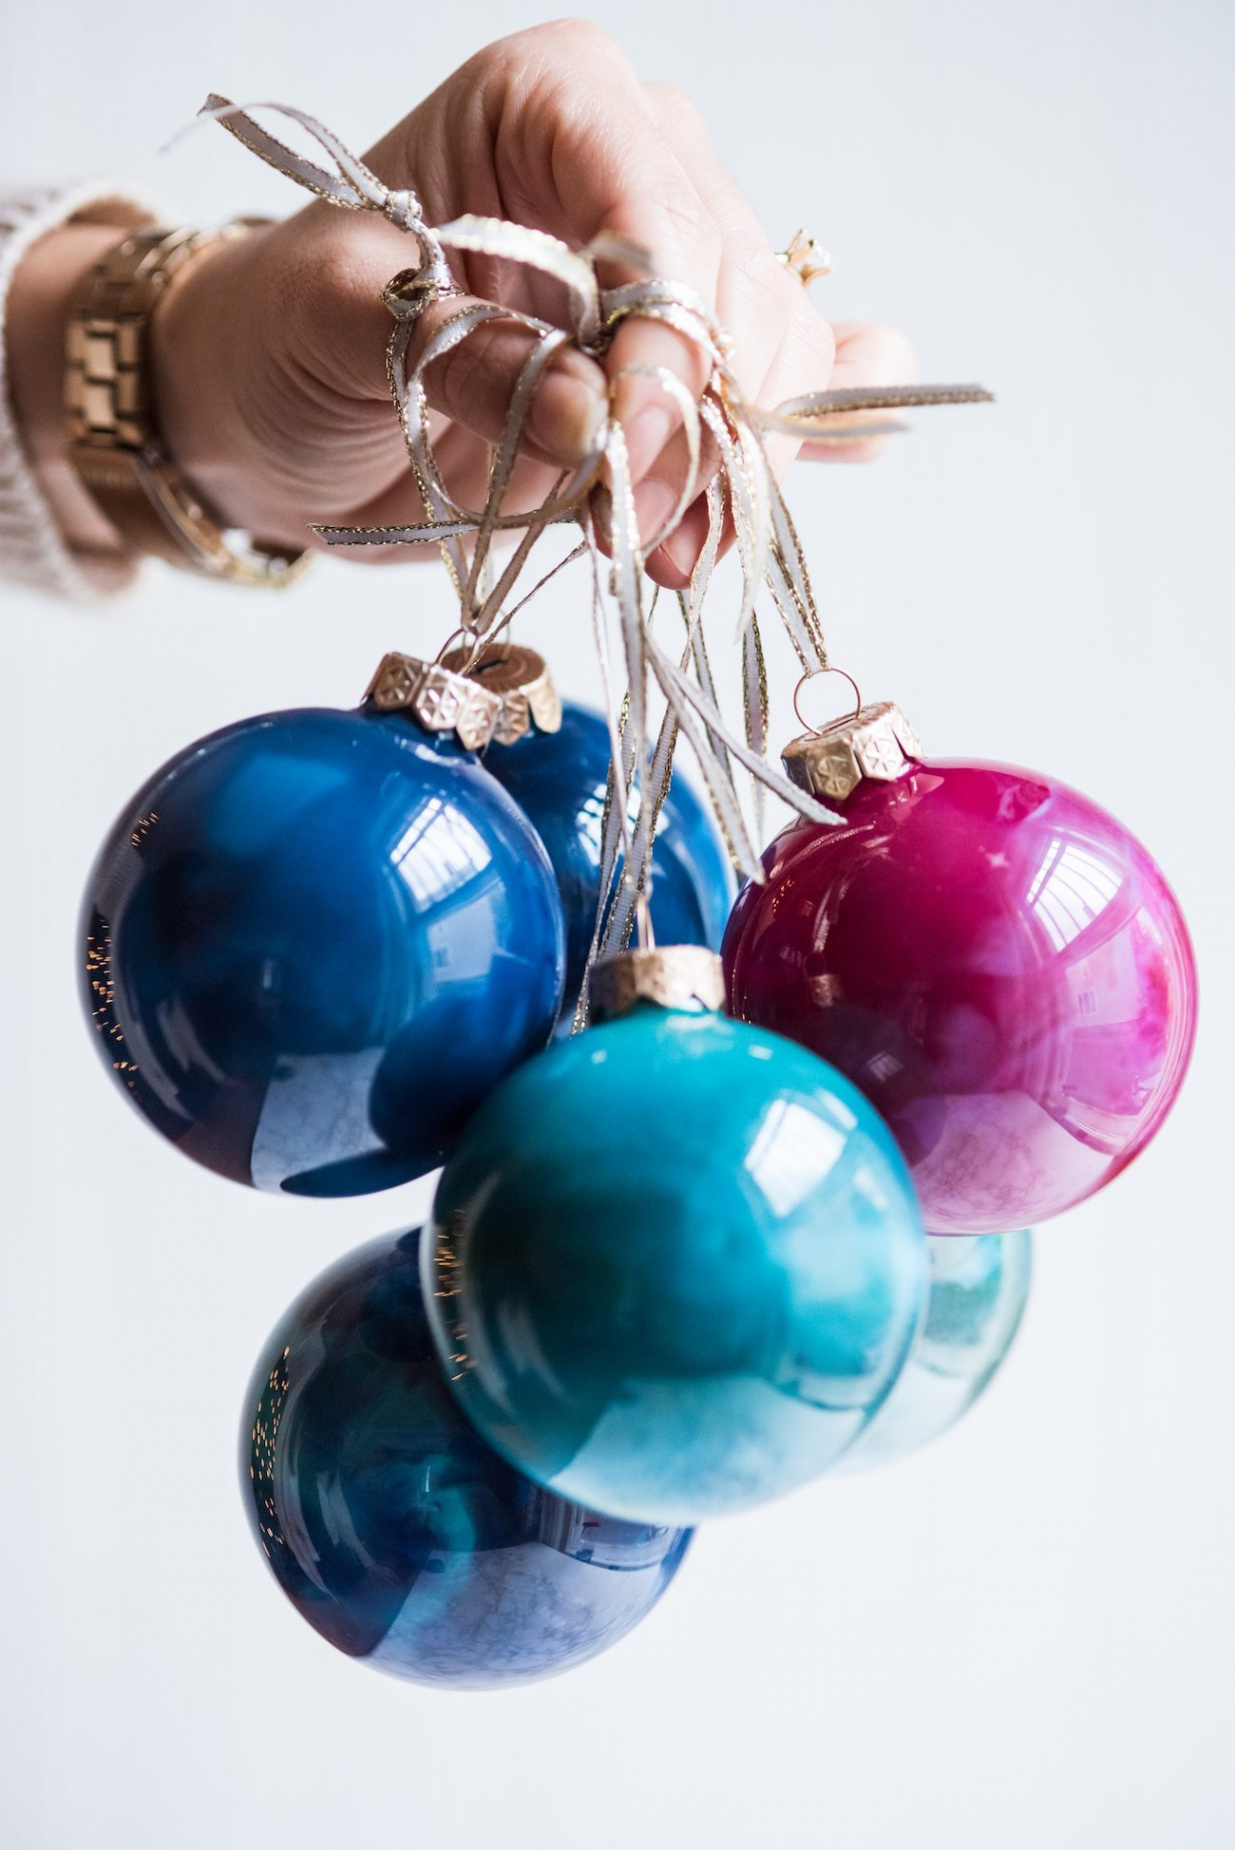 DIY Christmas Ornaments with Melted Crayons - The Sweetest Occasion